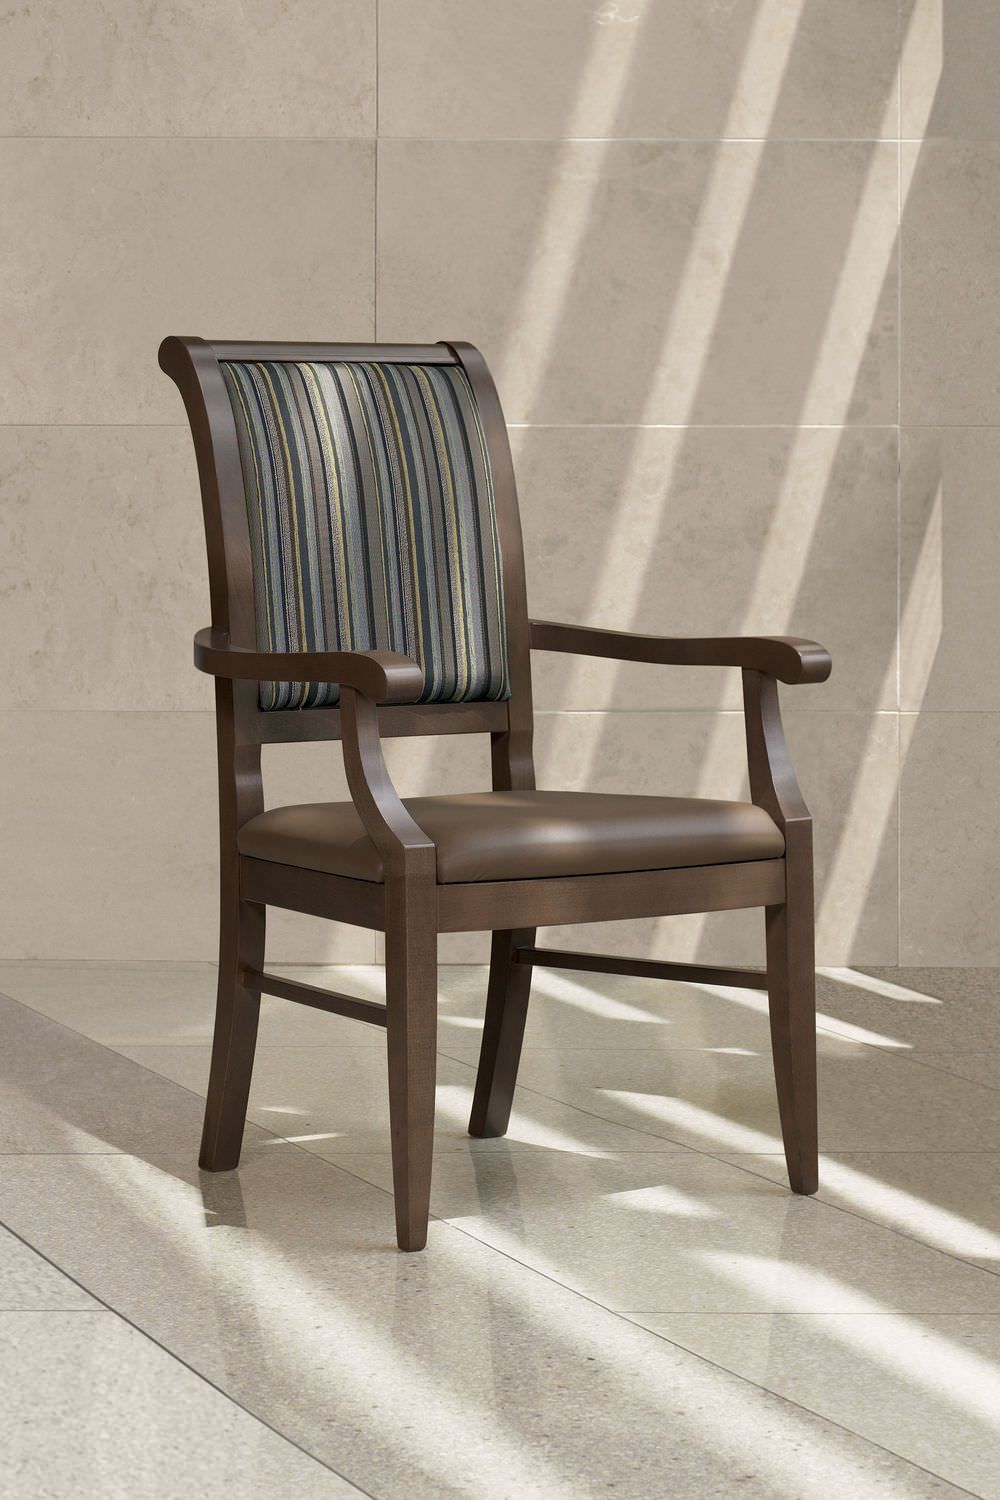 Chair with armrests Phoenix Global Care